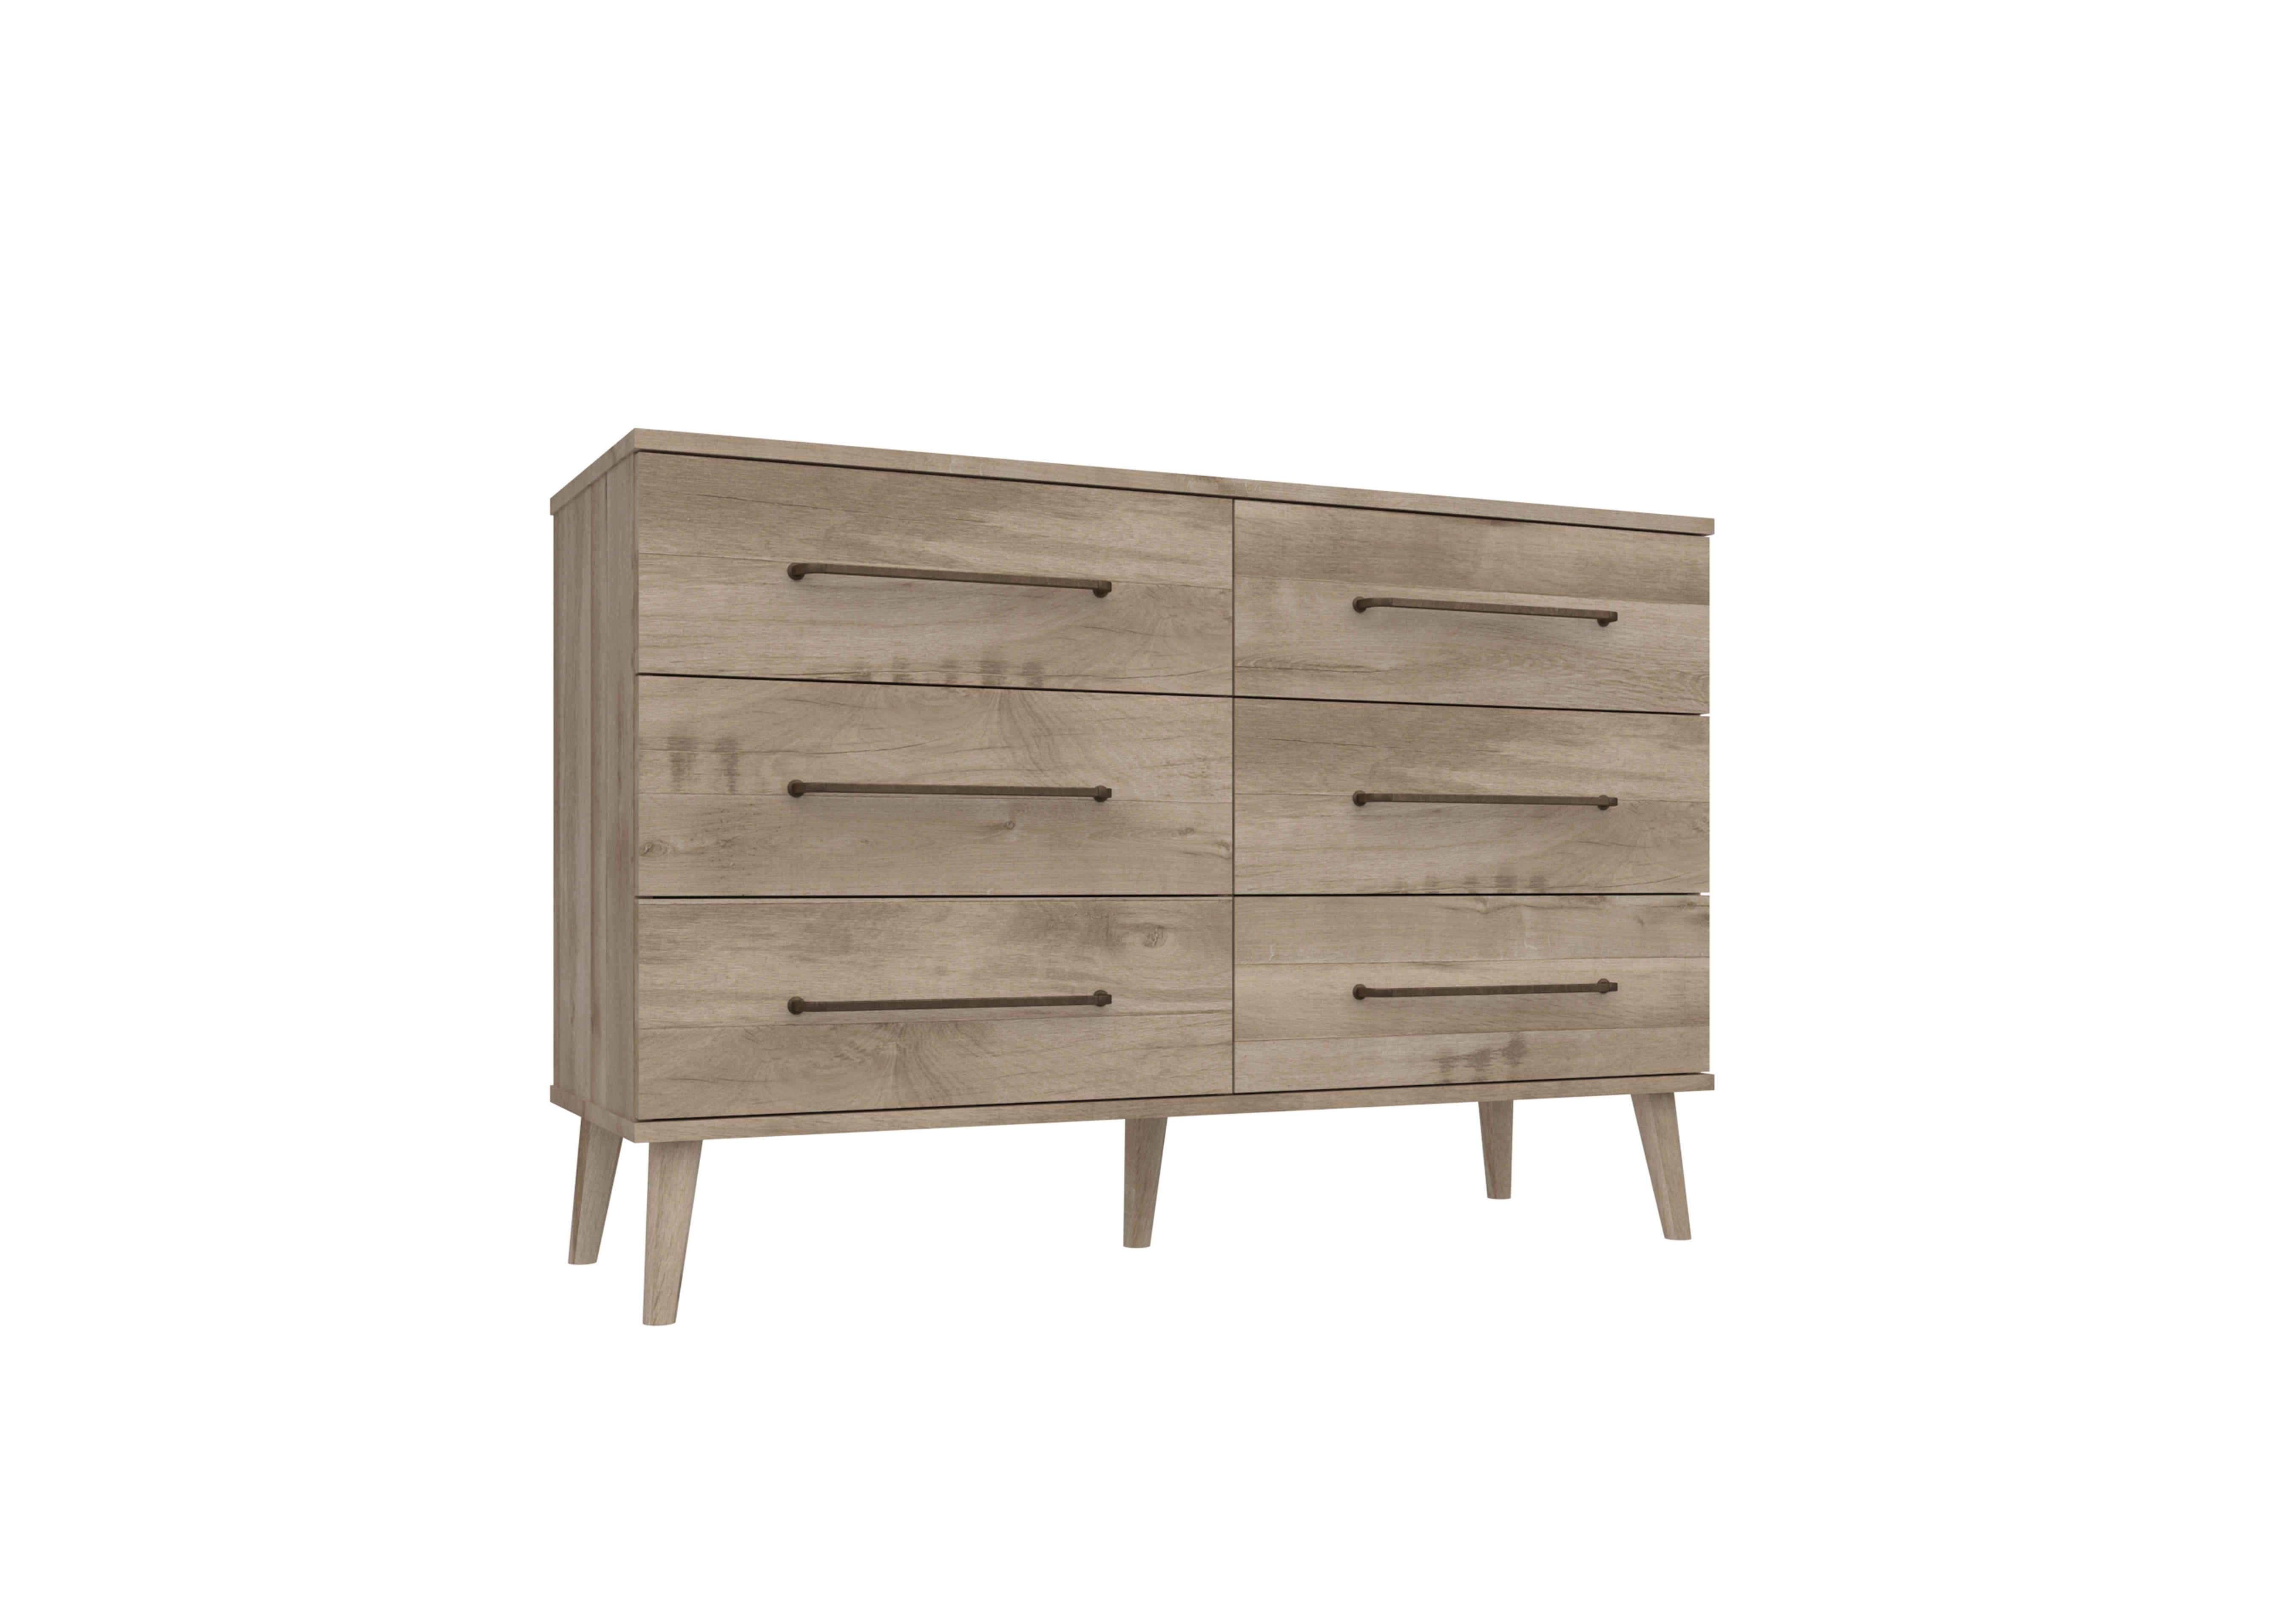 Finchley 6 Drawer Wide Chest in Italian Natural Oak on Furniture Village